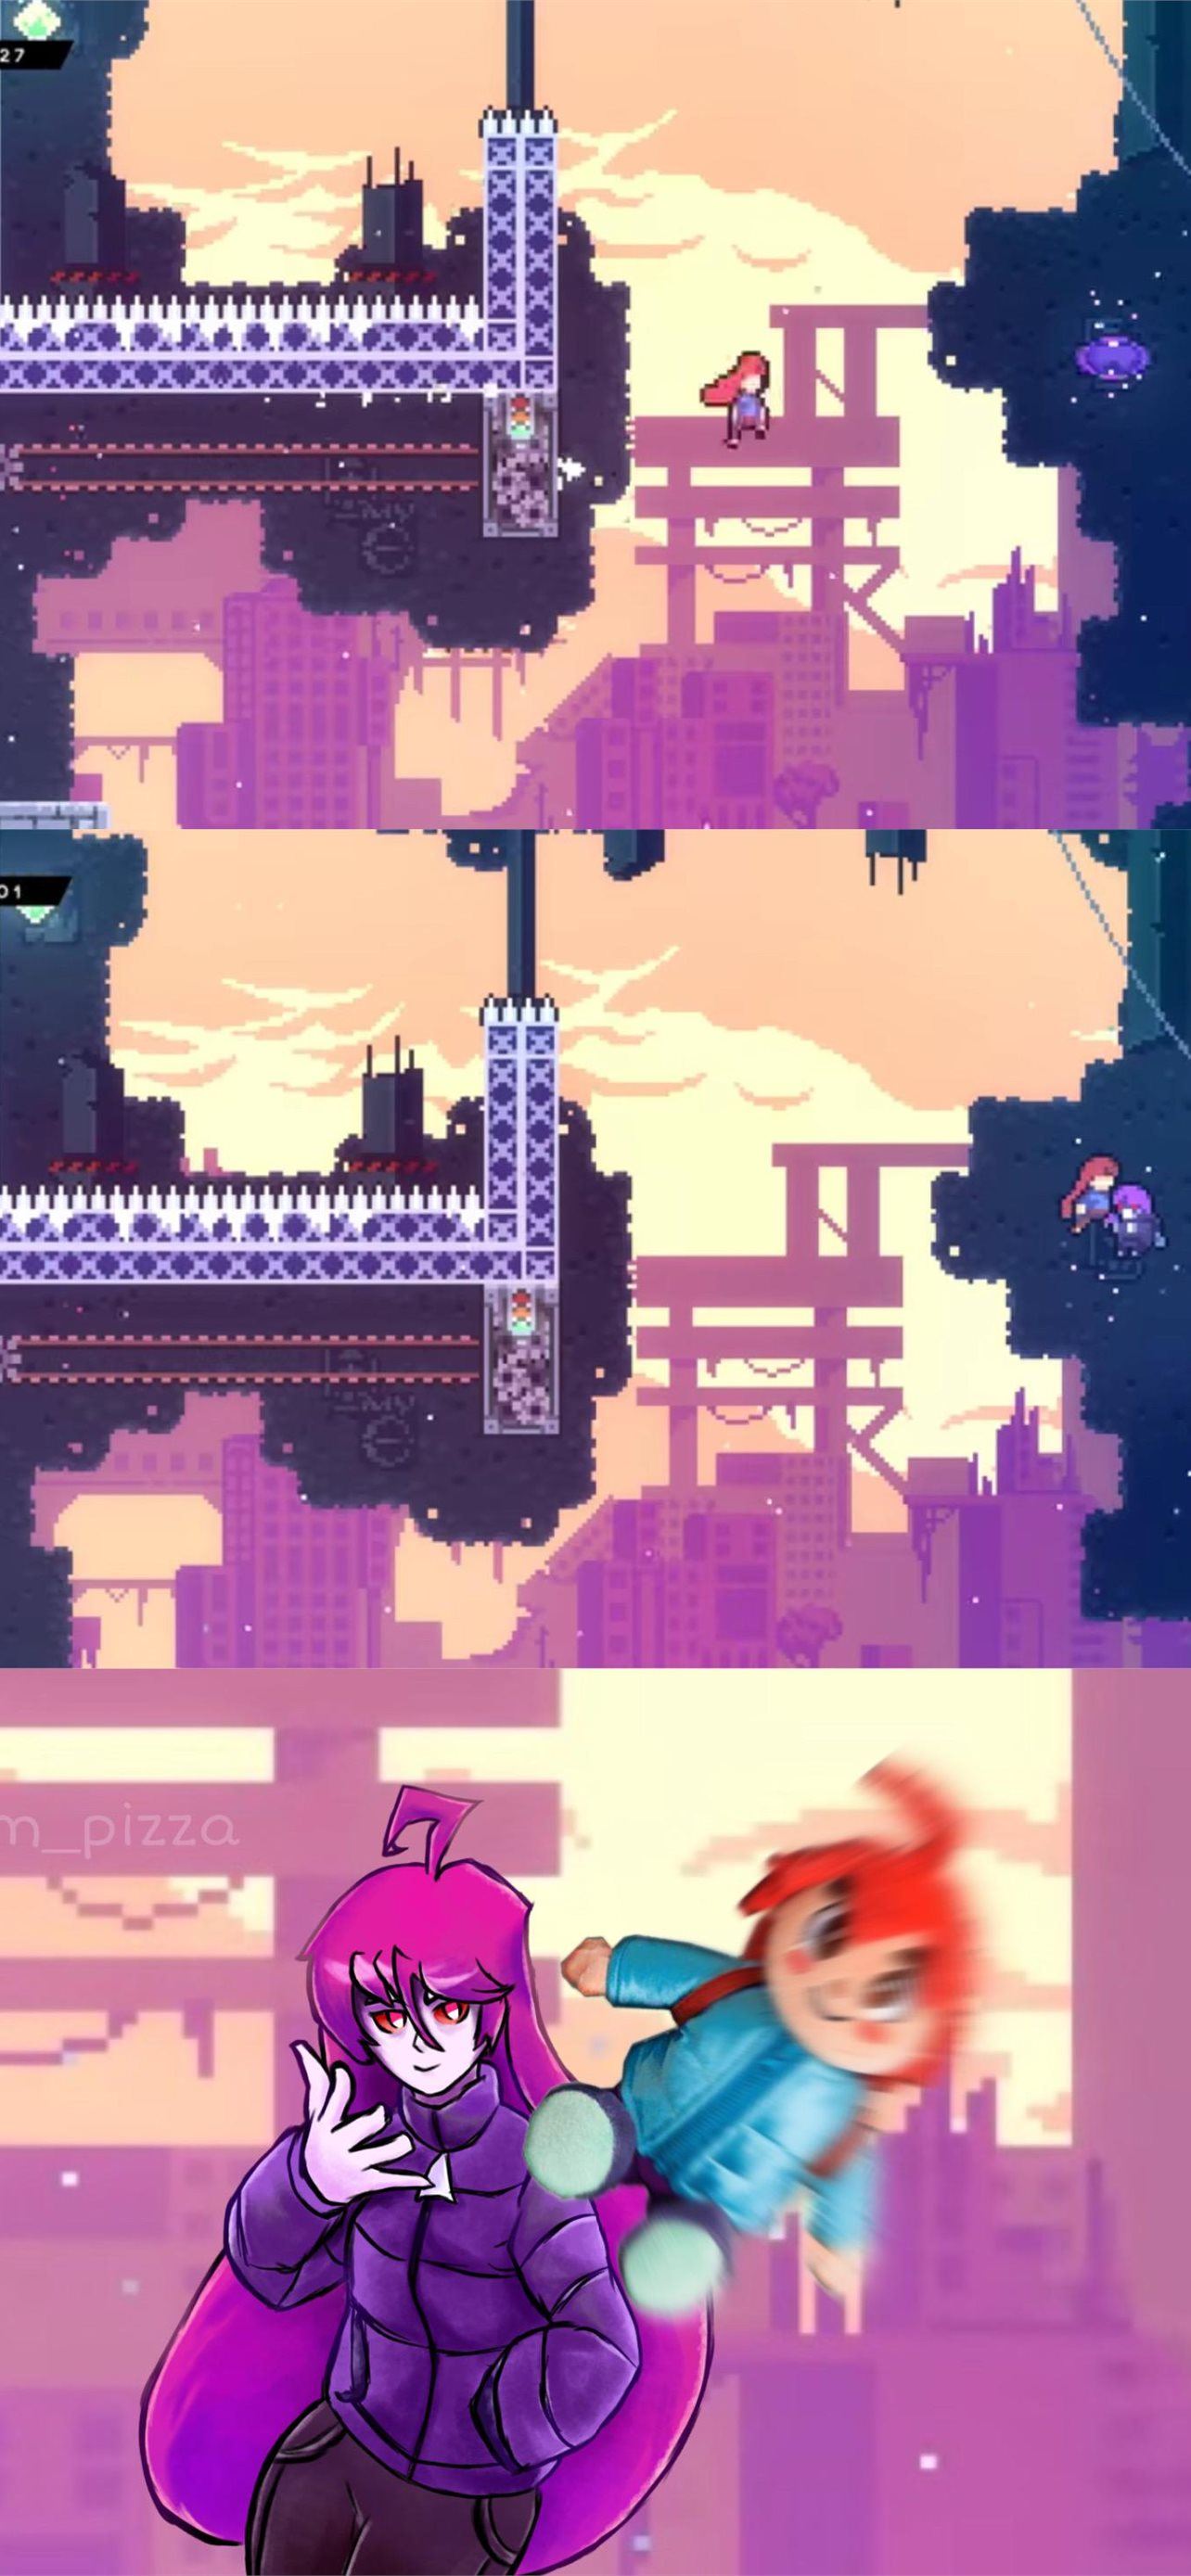 Celeste game iphone wallpapers free download